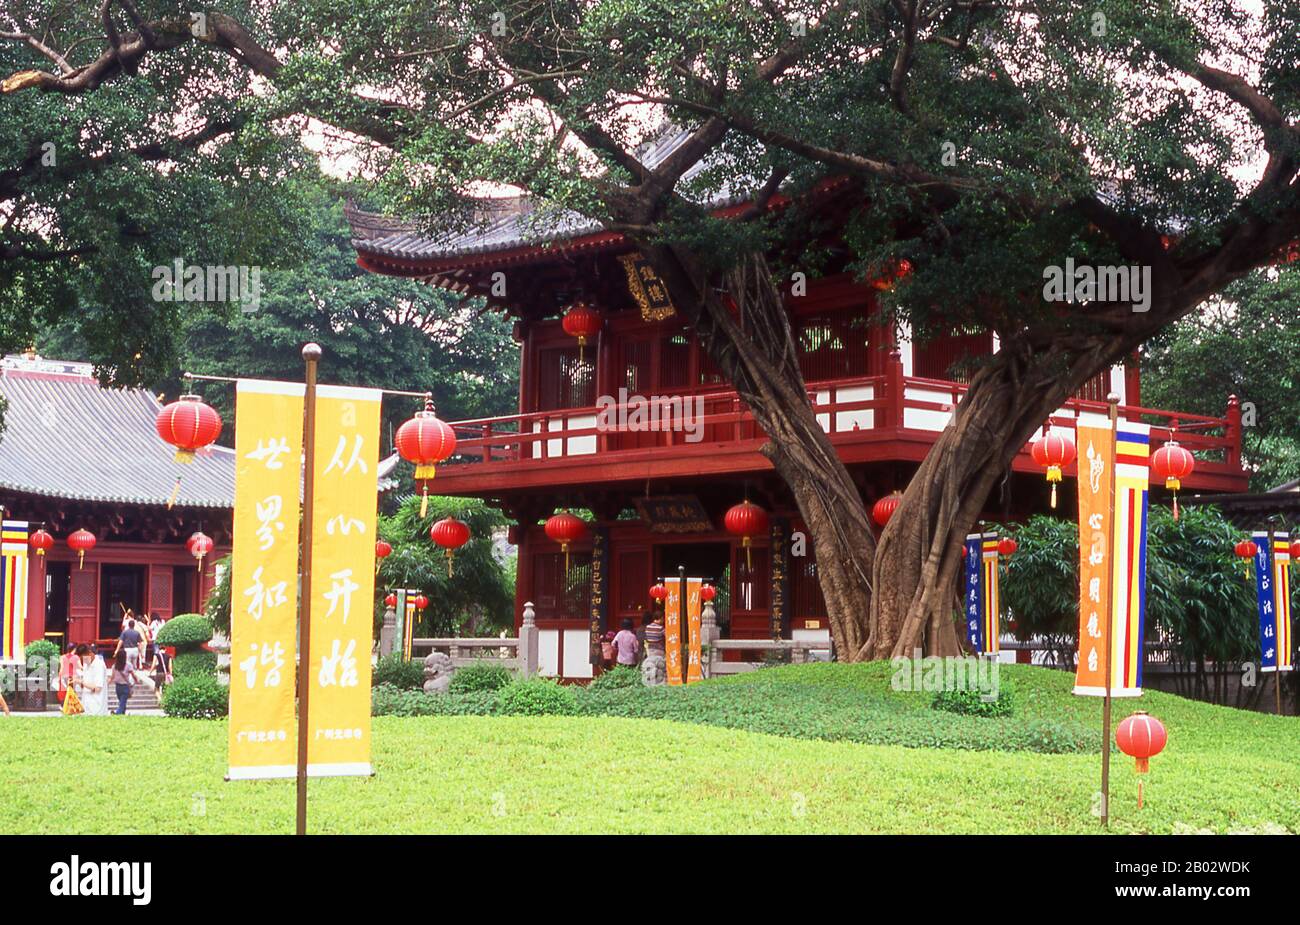 This Zen, or Chan, Buddhist temple, is the oldest in Guangzhou, dating back to the Eastern Jin dynasty (265 - 420 CE). It was originally built around 400 CE by an Indian monk. Hui Neng, the Sixth Patriarch of Zen Buddhism, served as a novice monk here in the 600s.  Most of the present structures date back to 1832, the time of the last big renovation. The Great Hall, with its impressive pillars, is still architecturally interesting. There are two pagodas behind the hall: the stone Jingfa Pagoda built in 676 on top of a hair of Hui Neng, and the Song-dynasty Eastern Iron Pagoda, made of gilt iro Stock Photo